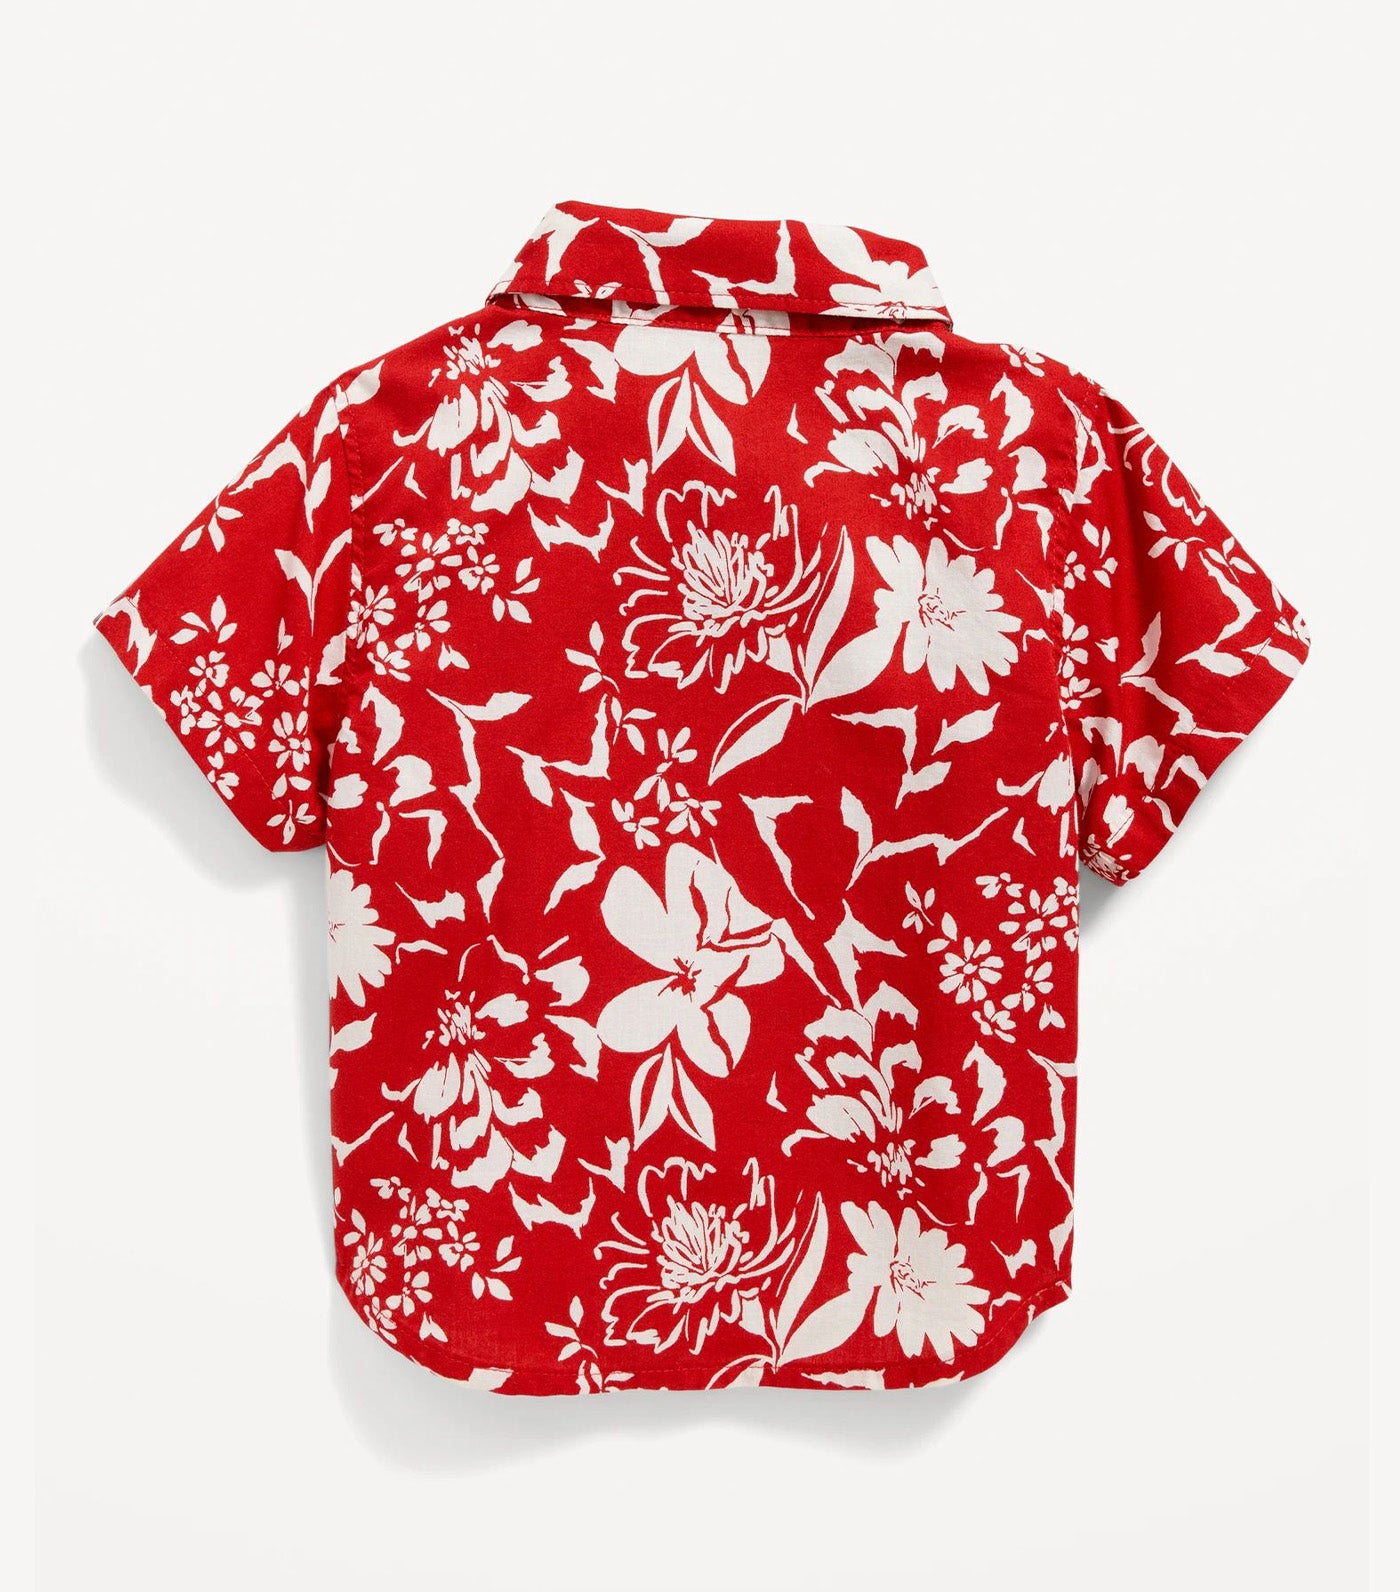 Matching Short-Sleeve Printed Poplin Shirt for Toddler Boys - Red Floral